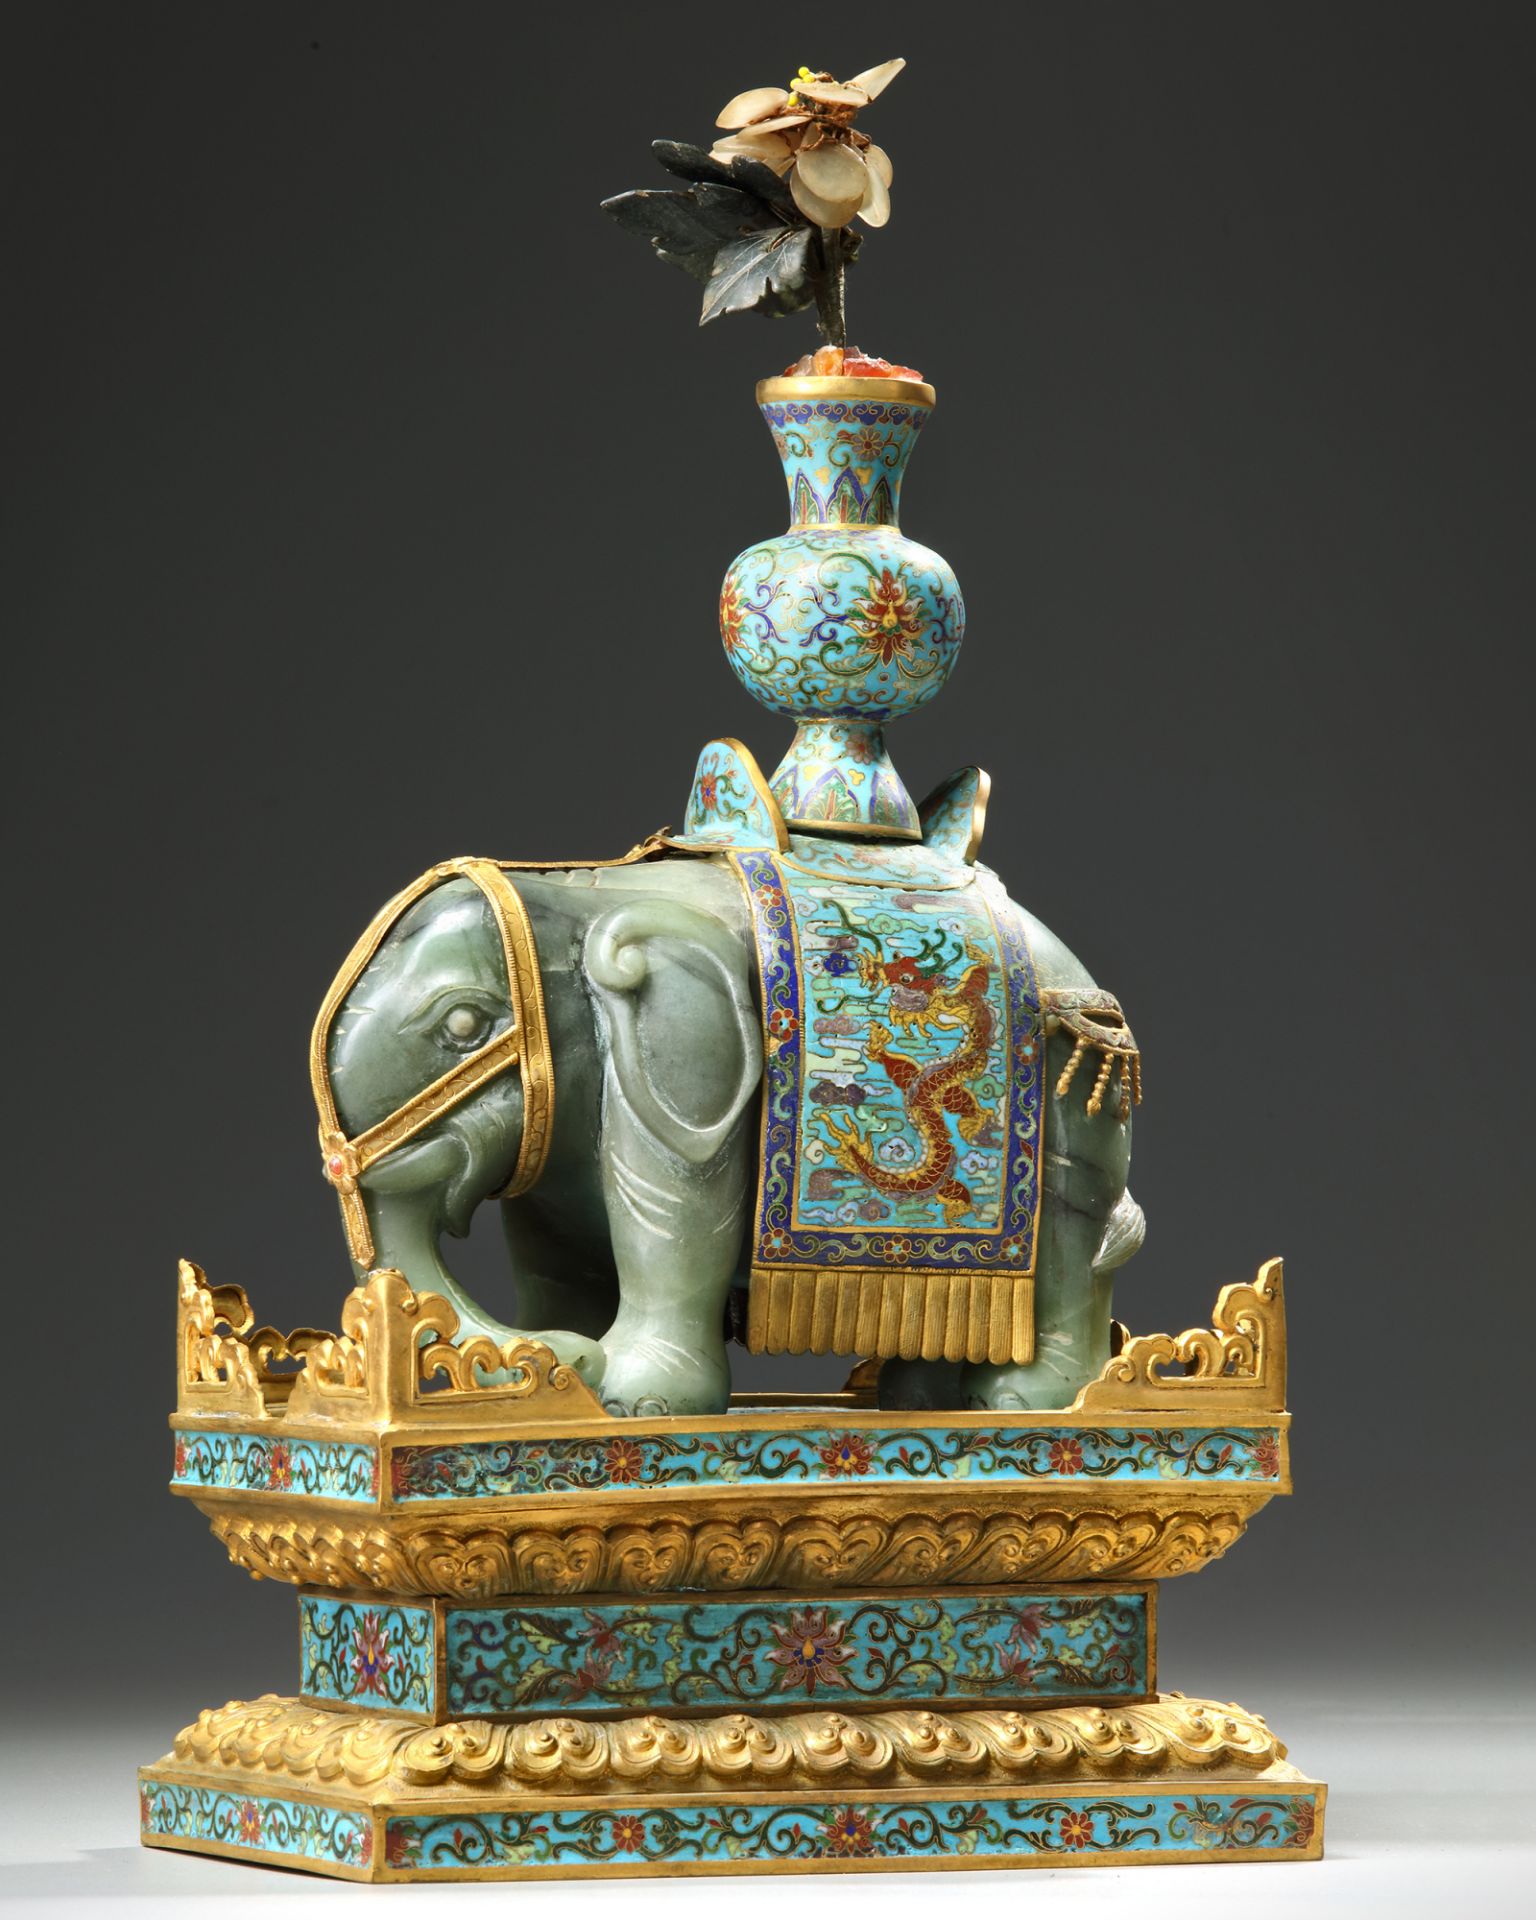 A CHINESE JADE AND CLOISONNÉ CAPARISONED ELEPHANT ON A CLOISONNÉ BASE - Image 2 of 6